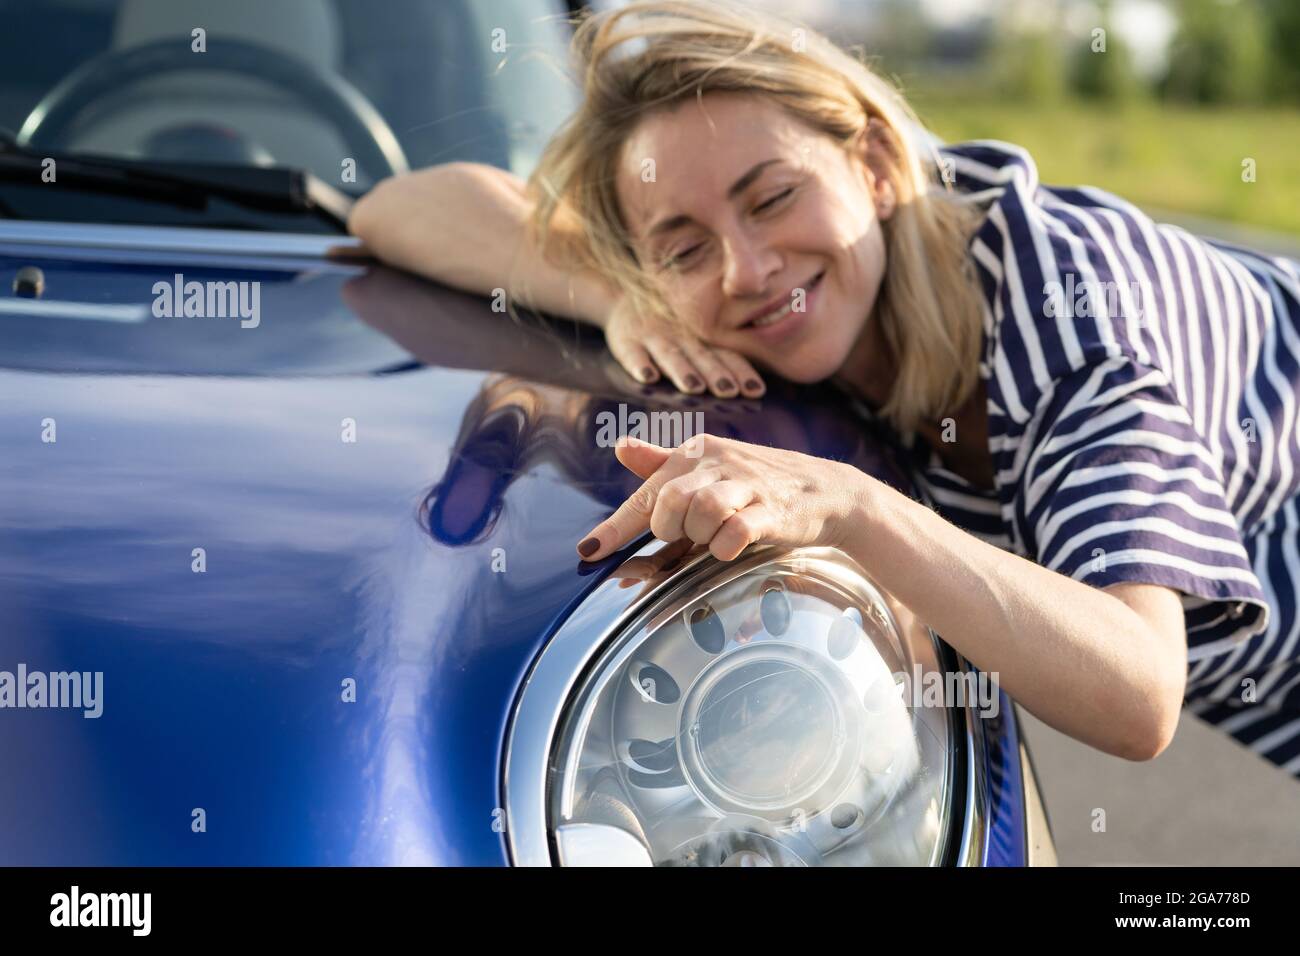 Middle woman driver embracing hood of car after detailing, polishing. Car insurance advertisement Stock Photo